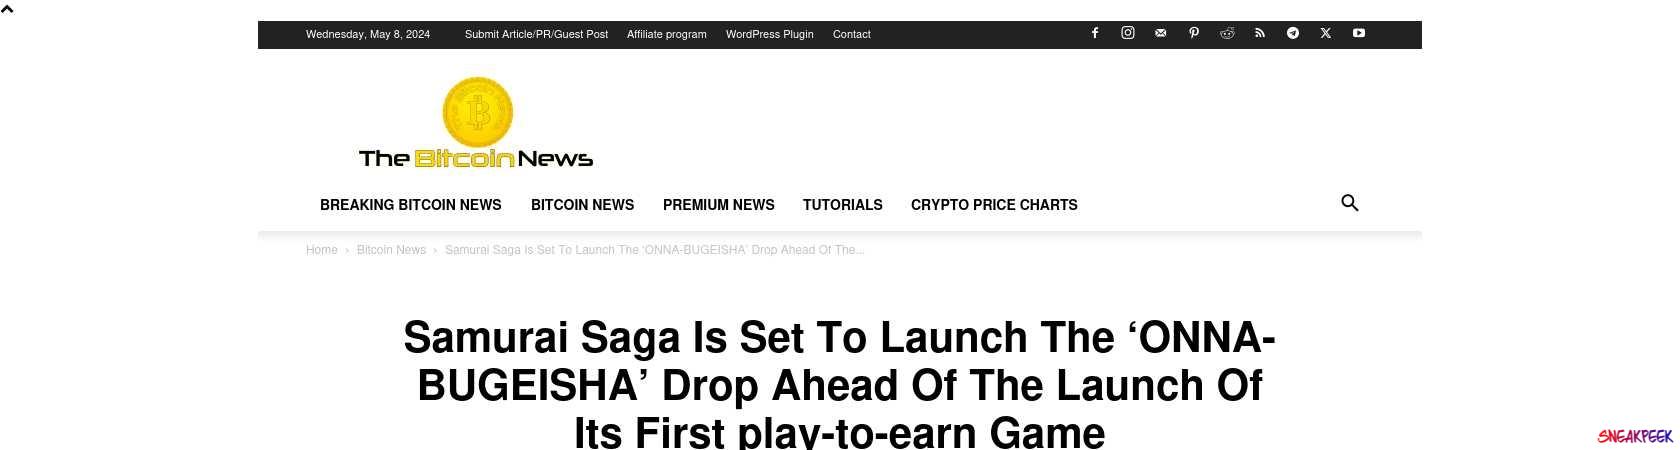 Read the full Article:  ⭲ Samurai Saga Is Set To Launch The ‘ONNA-BUGEISHA’ Drop Ahead Of The Launch Of Its First play-to-earn Game